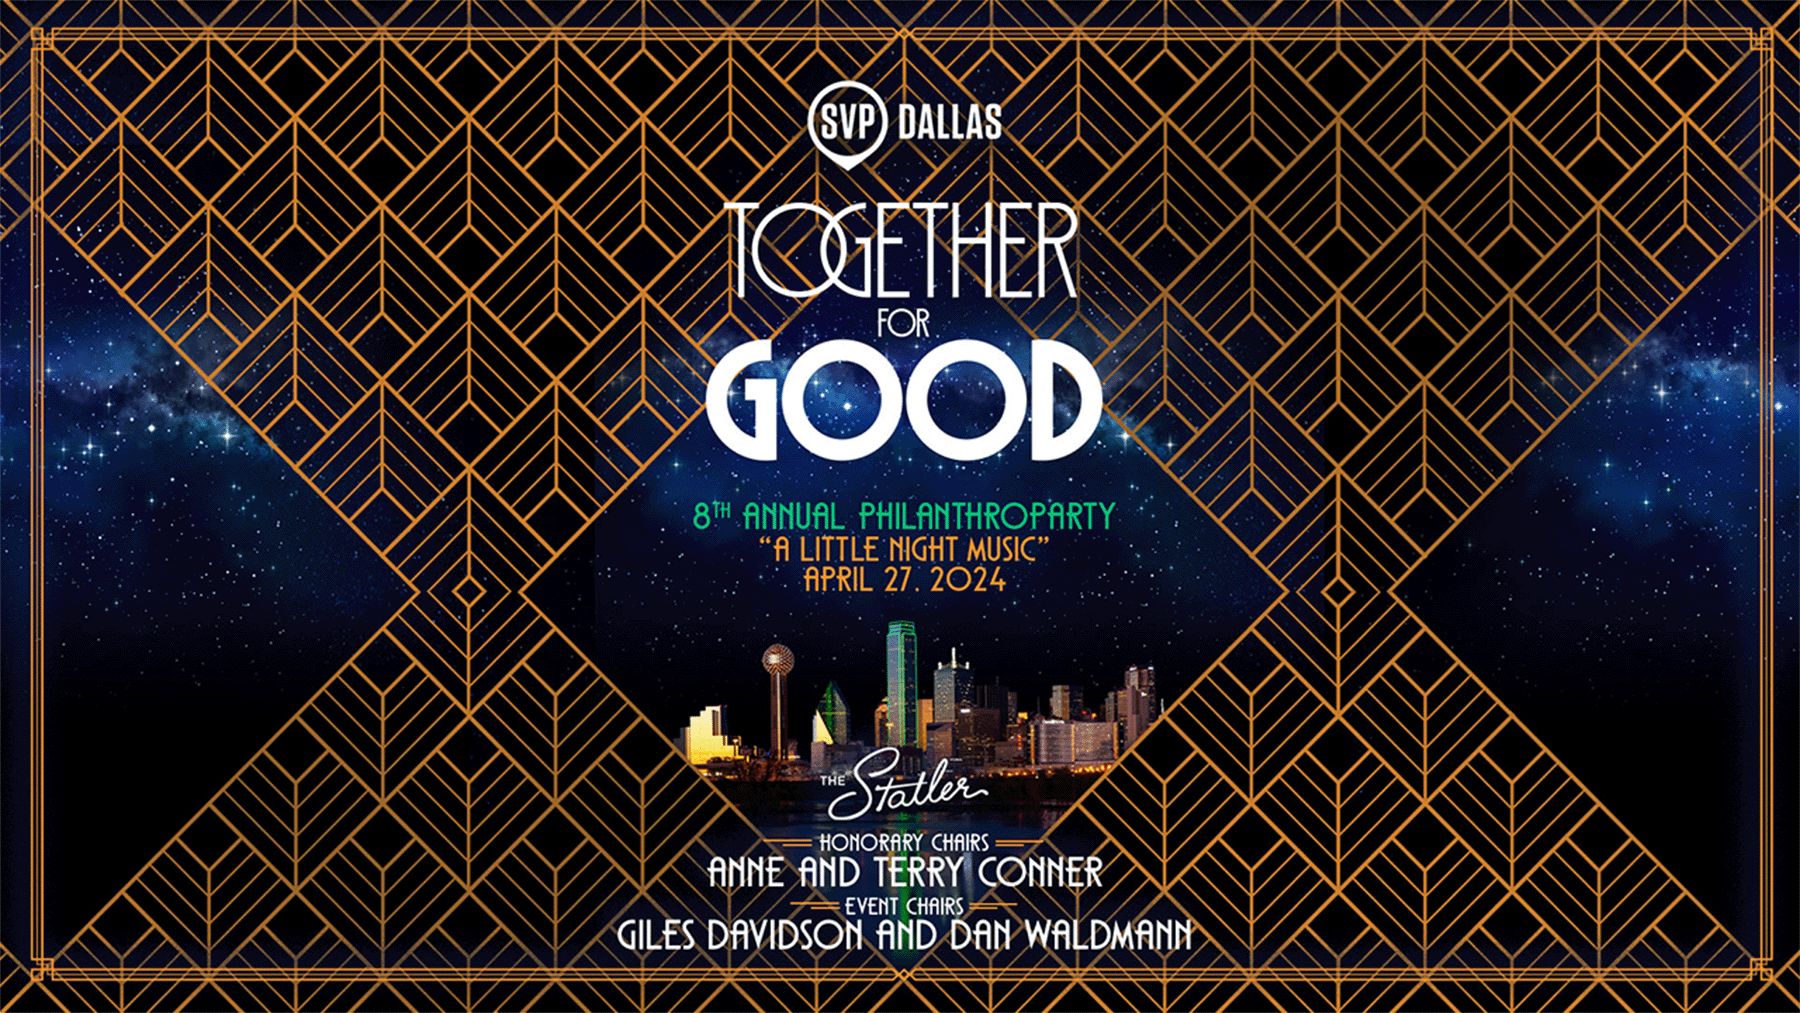 Philanthroparty 2024: Together for Good Gala, Dallas, Texas, United States